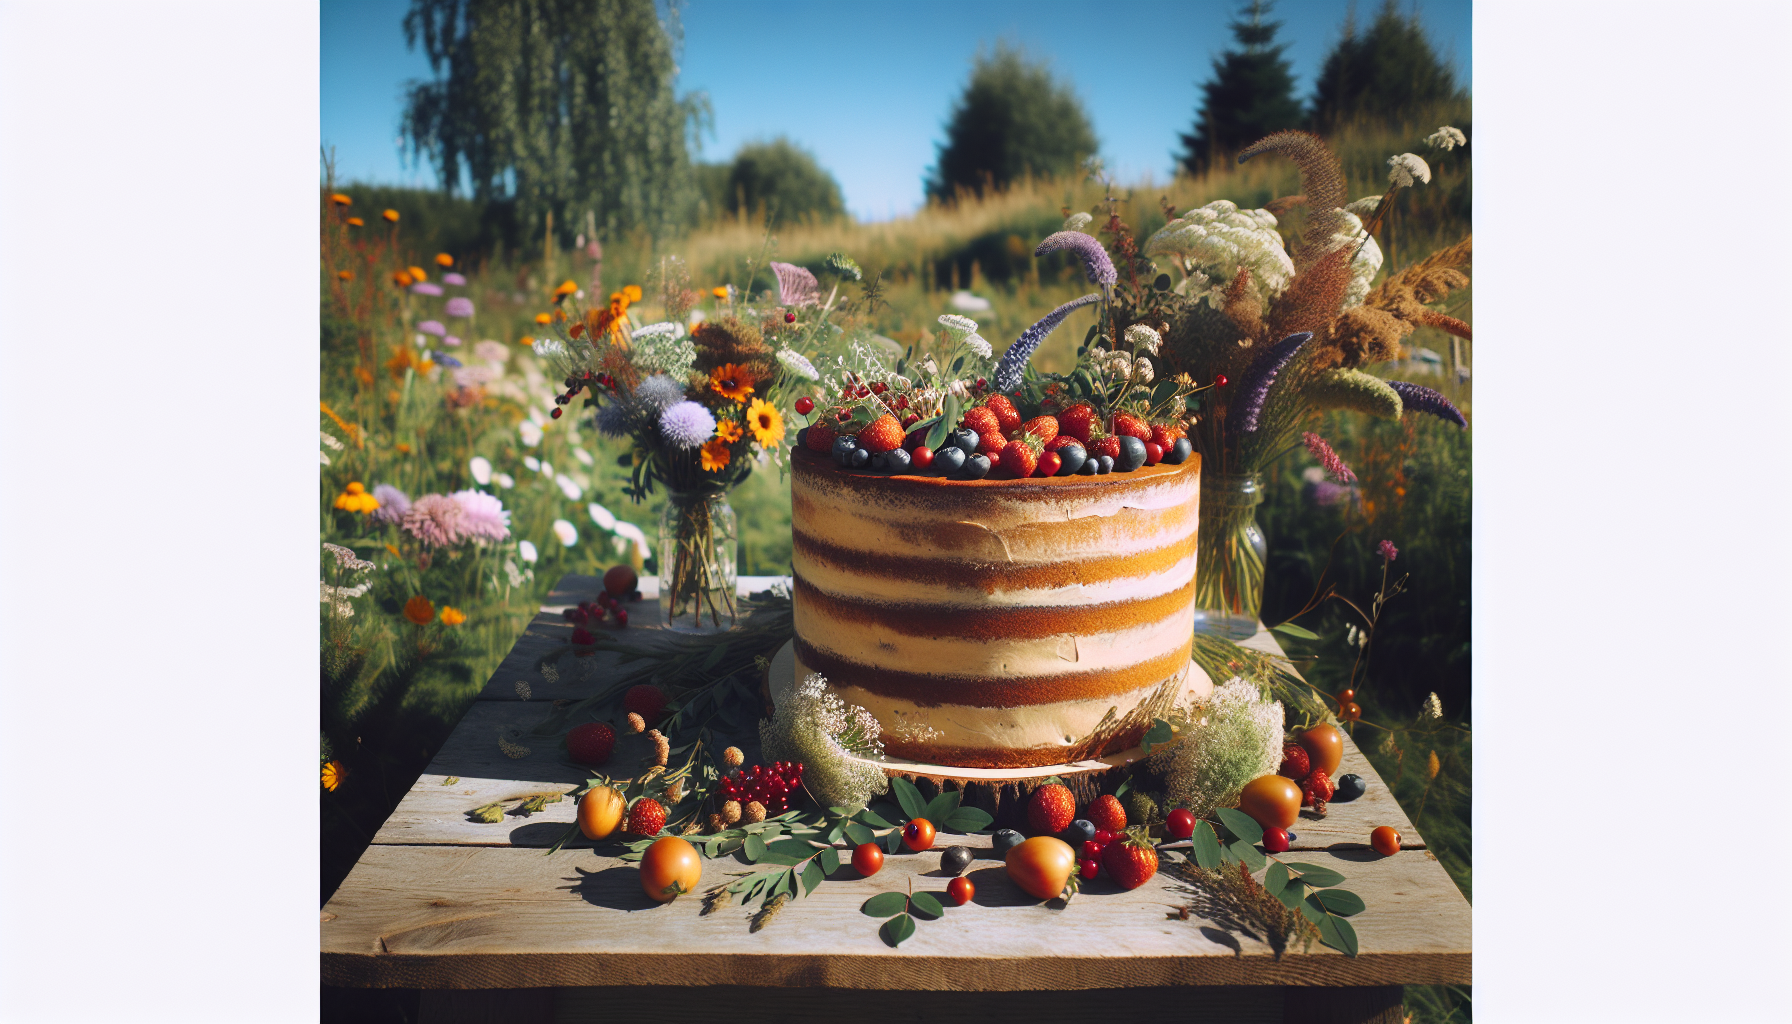 A rustic naked wedding cake displayed on a wooden table outdoors, surrounde